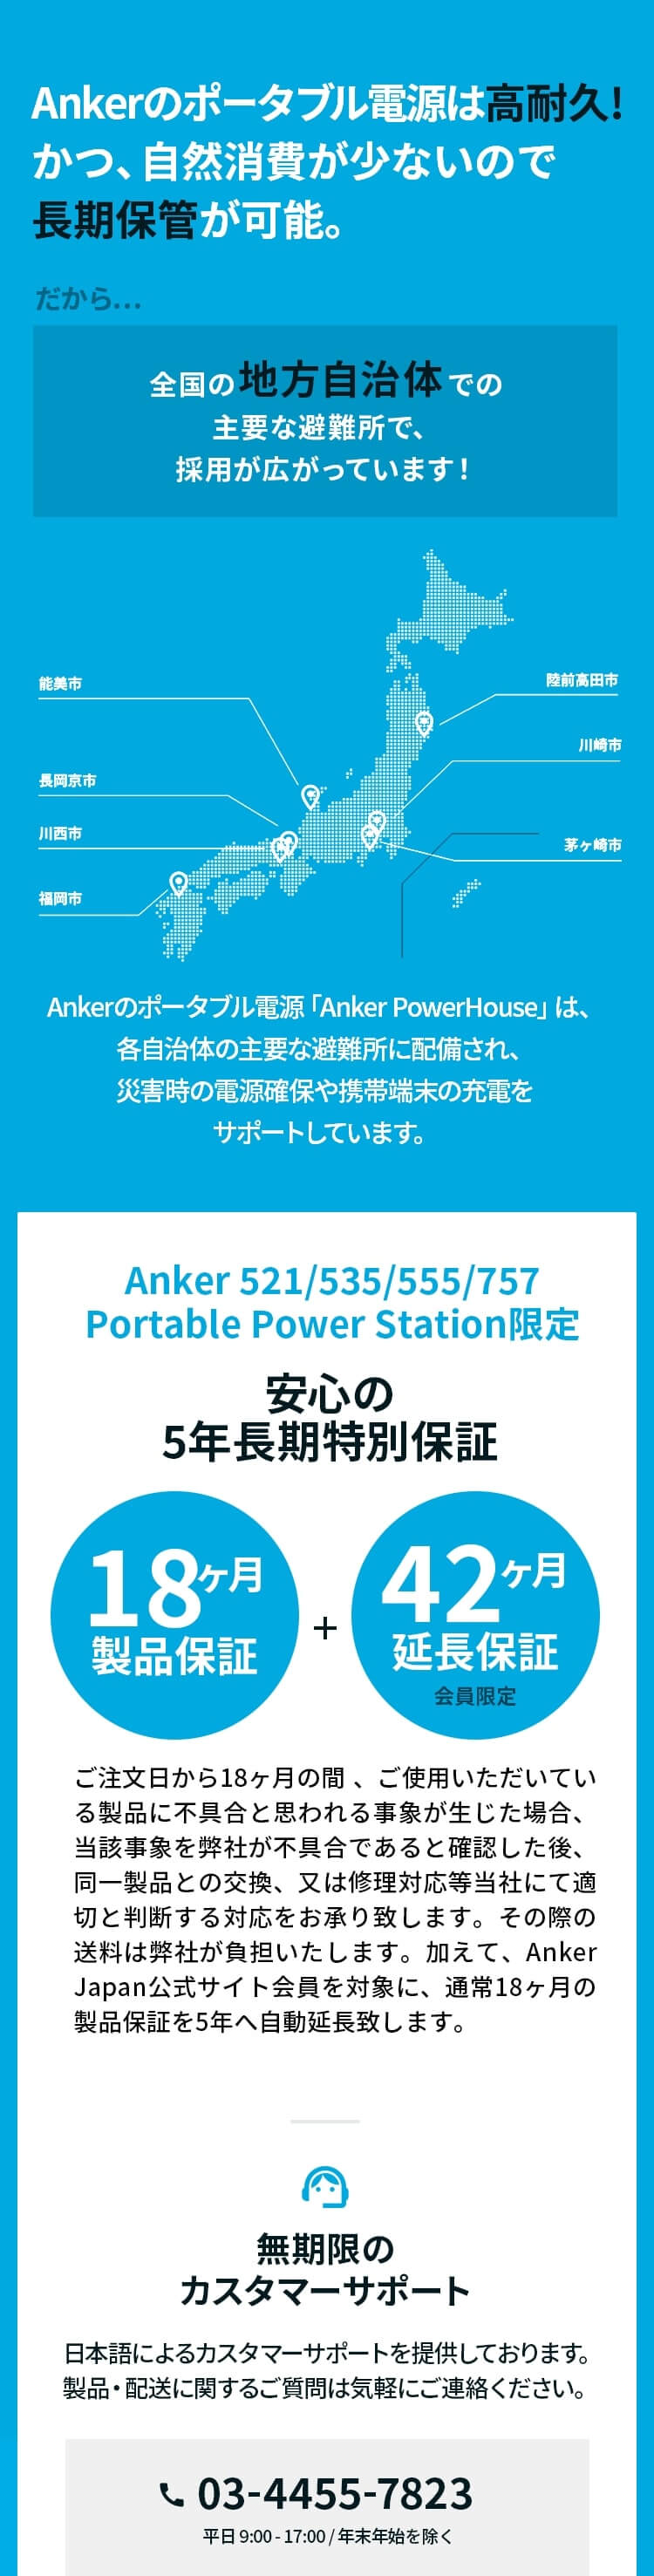 Anker 767 Portable Power Station (GaNPrime PowerHouse 2048Wh) 長寿命 ポータブル電源  リン酸鉄 :A1780:AnkerDirect 通販 